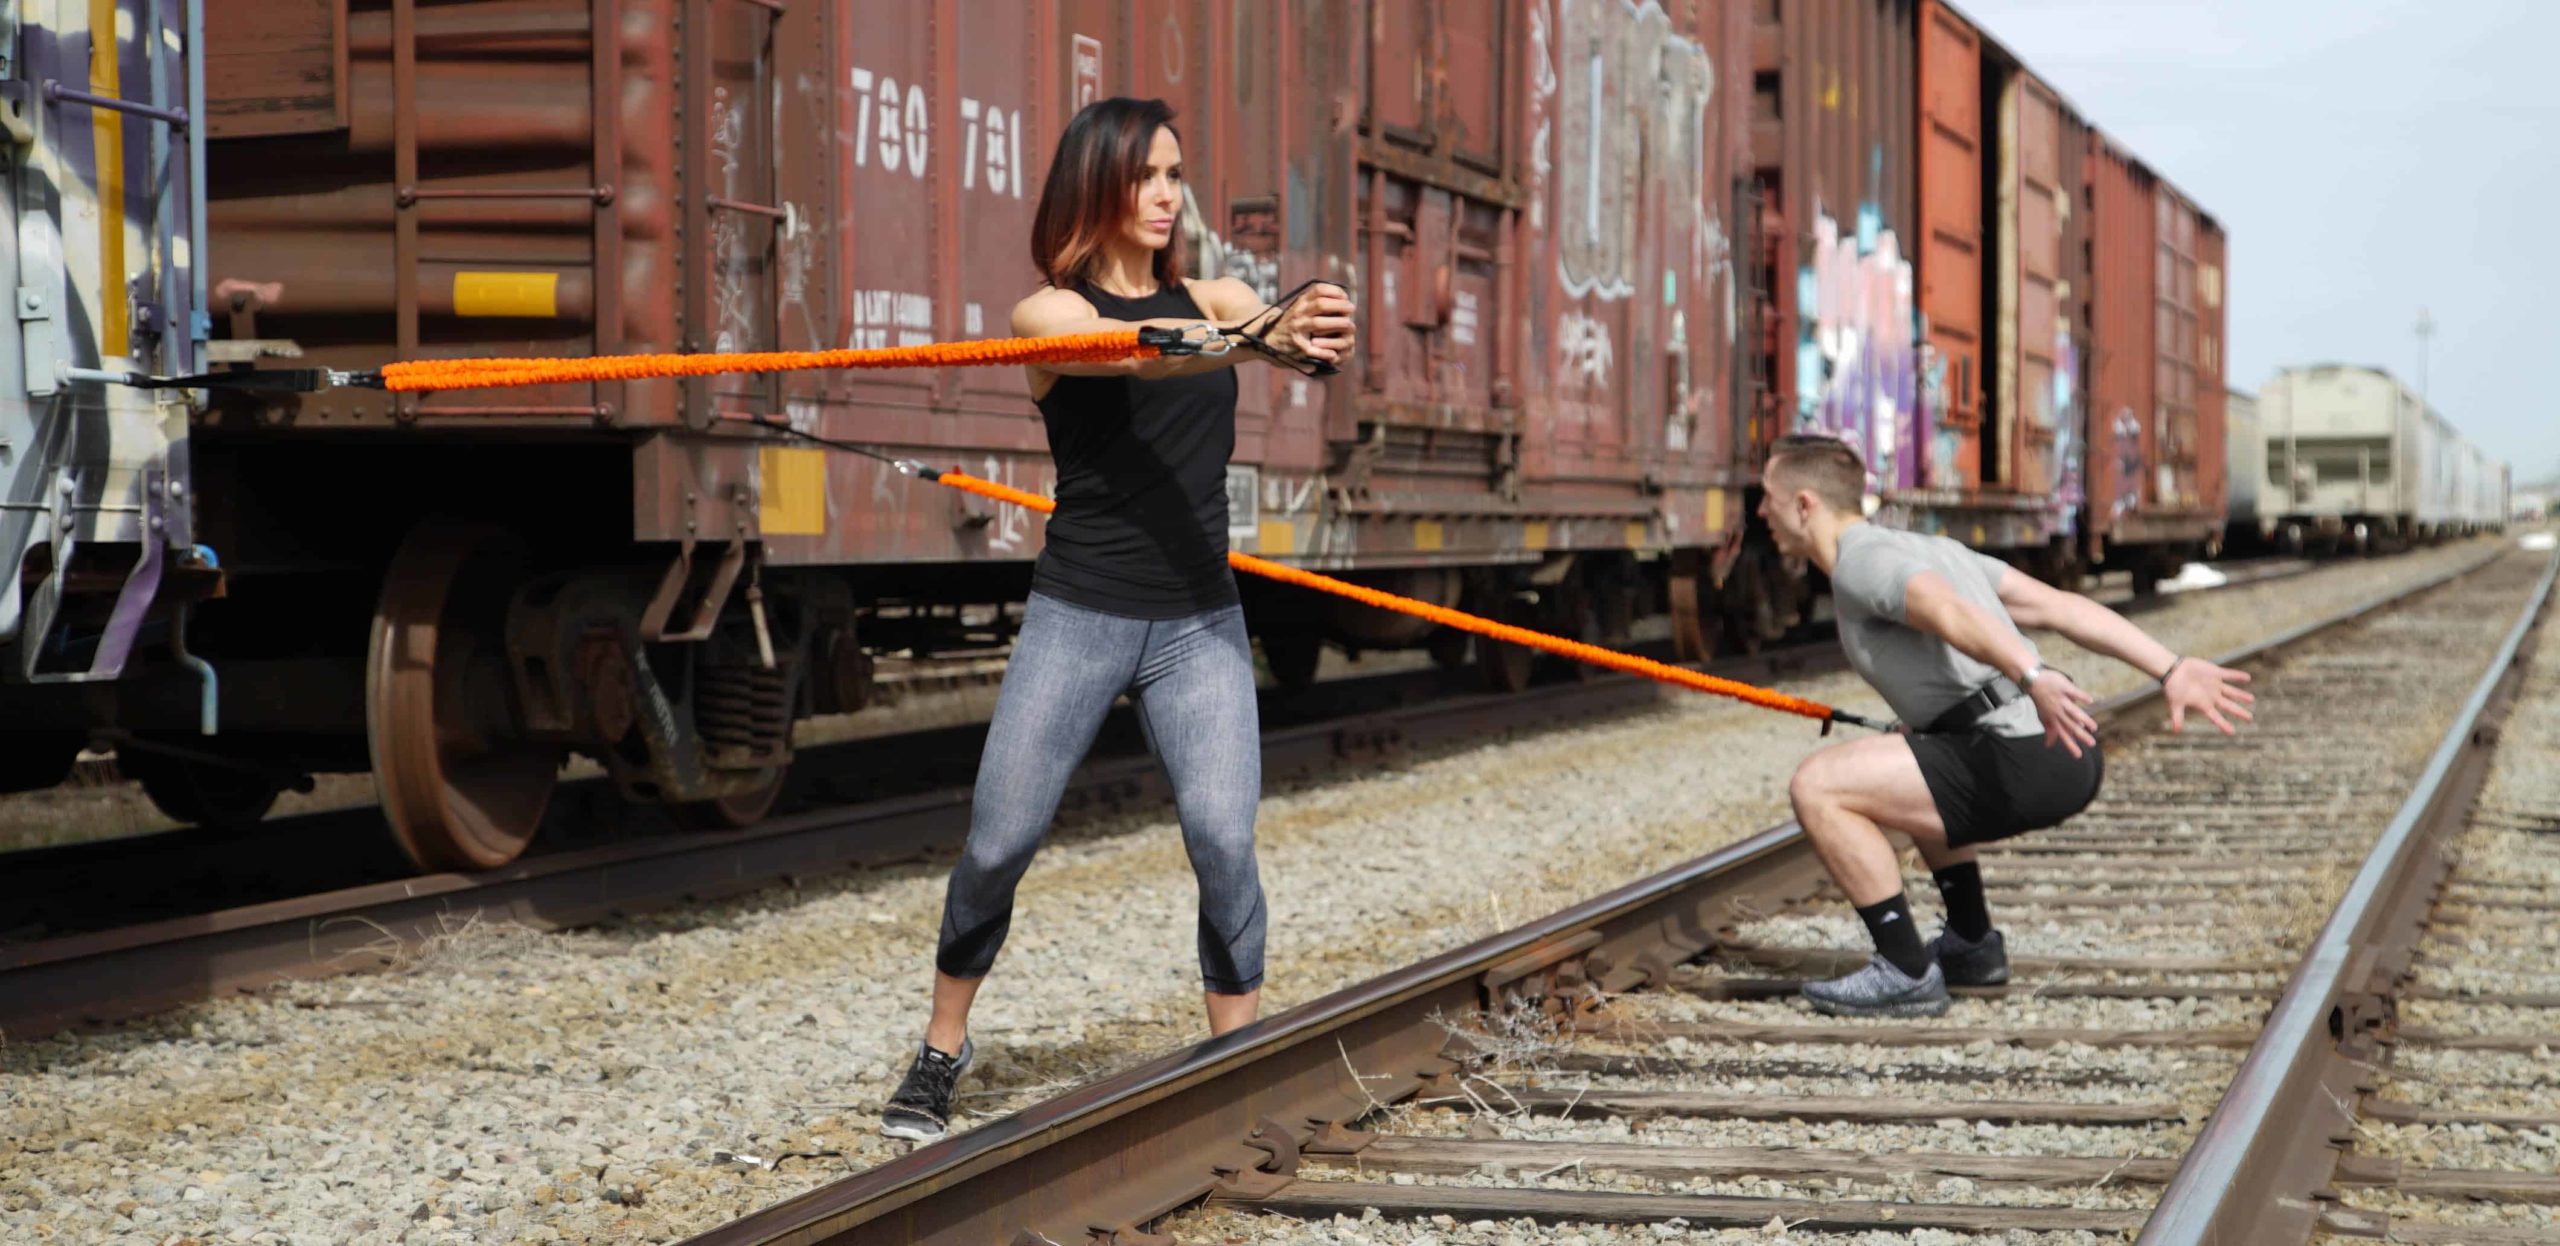 Stroops trainers doing a workout outside using Slastix connected to train cars